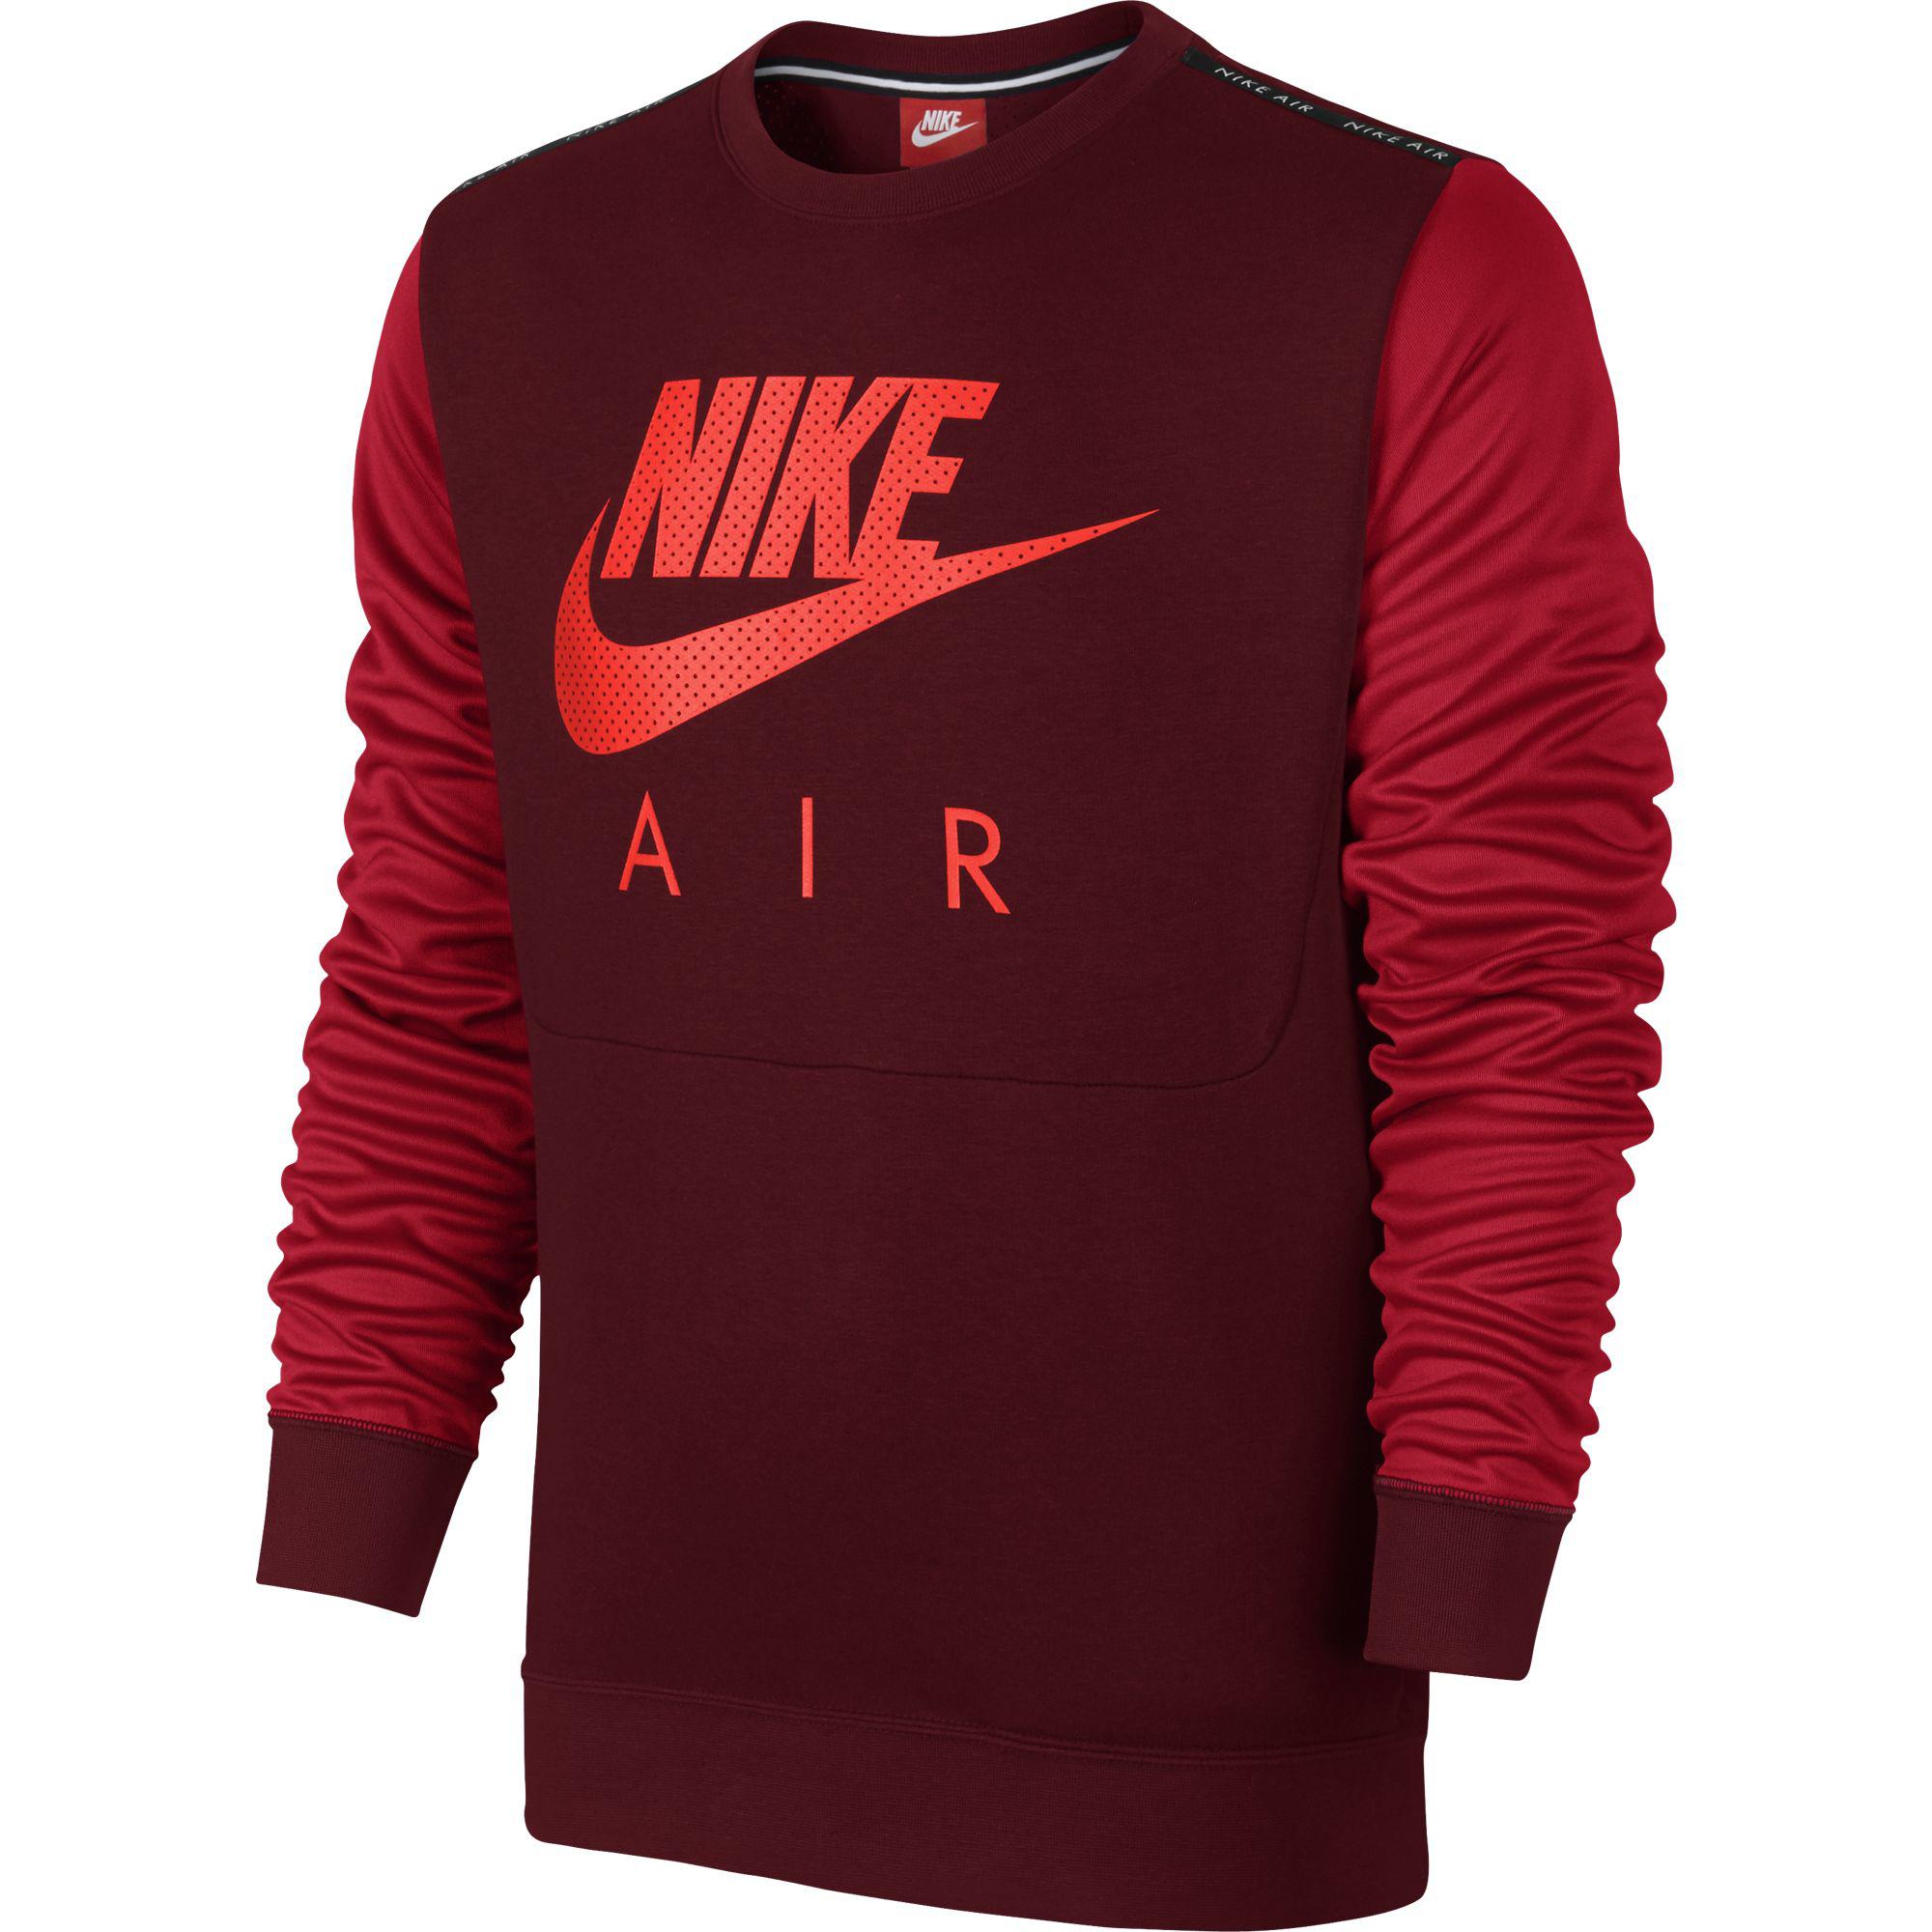 Mixed Red and Black Nike Logo